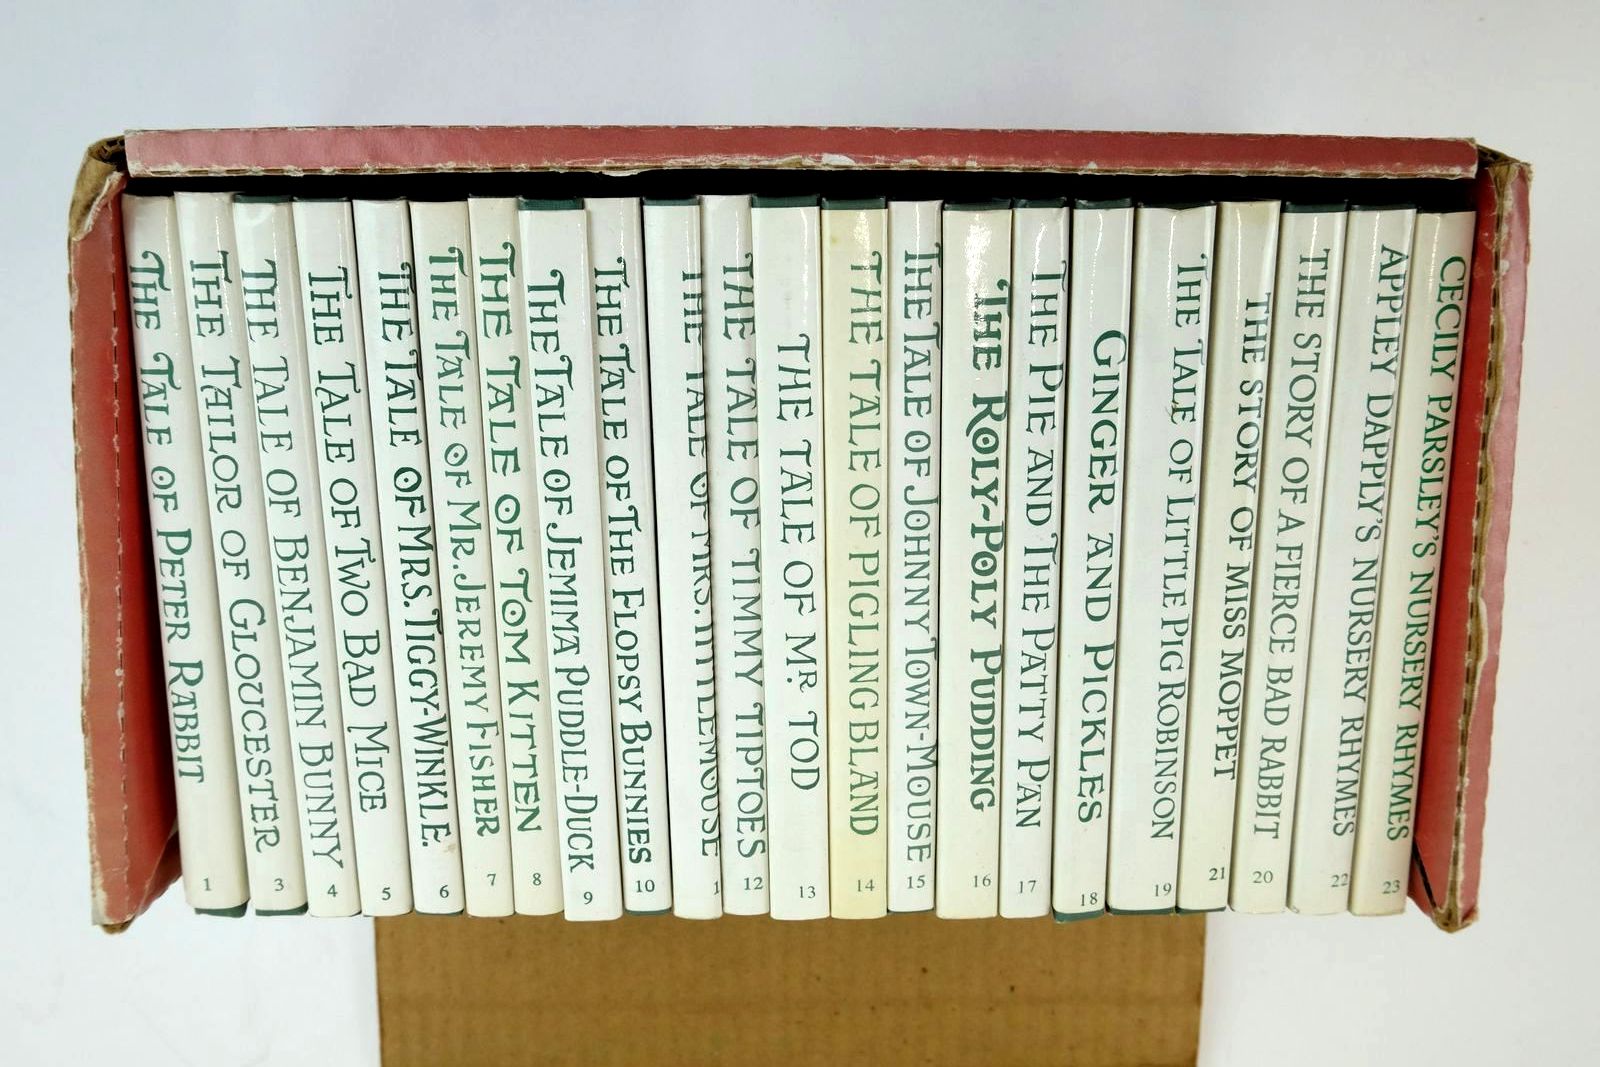 Photo of THE ORIGINAL PETER RABBIT BOOKS 23 BEATRIX POTTER NURSERY CLASSICS written by Potter, Beatrix illustrated by Potter, Beatrix published by Frederick Warne & Co. Inc. (STOCK CODE: 1321795)  for sale by Stella & Rose's Books